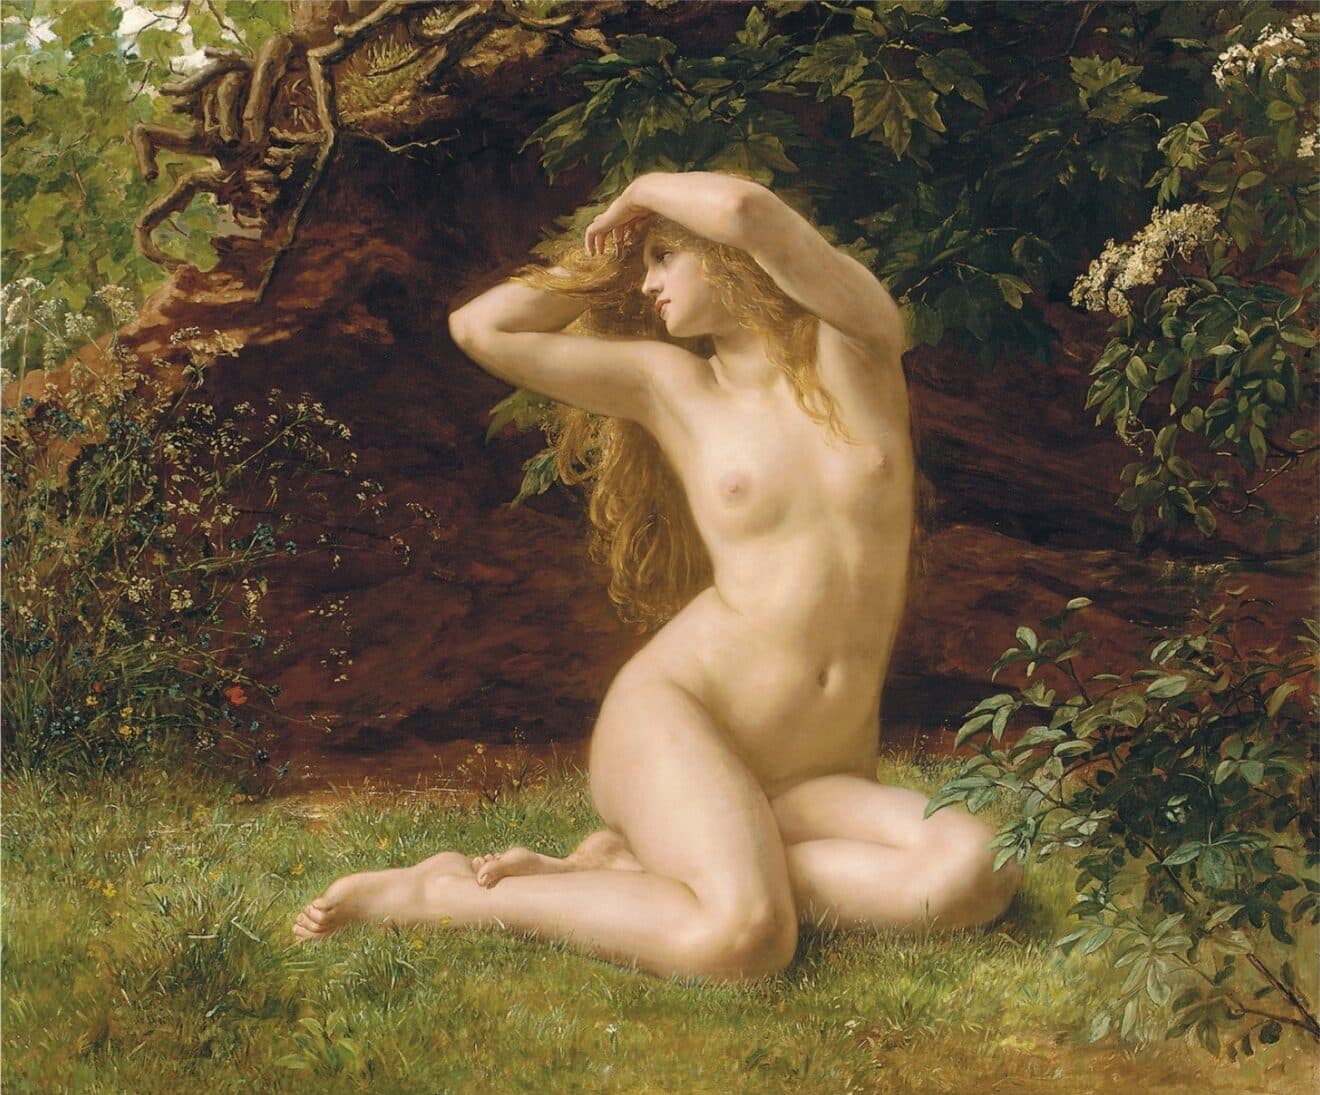 Valentine Cameron Prinsep, The First Awakening of Eve, ca. 19th century, private collection. Wikimedia Commons